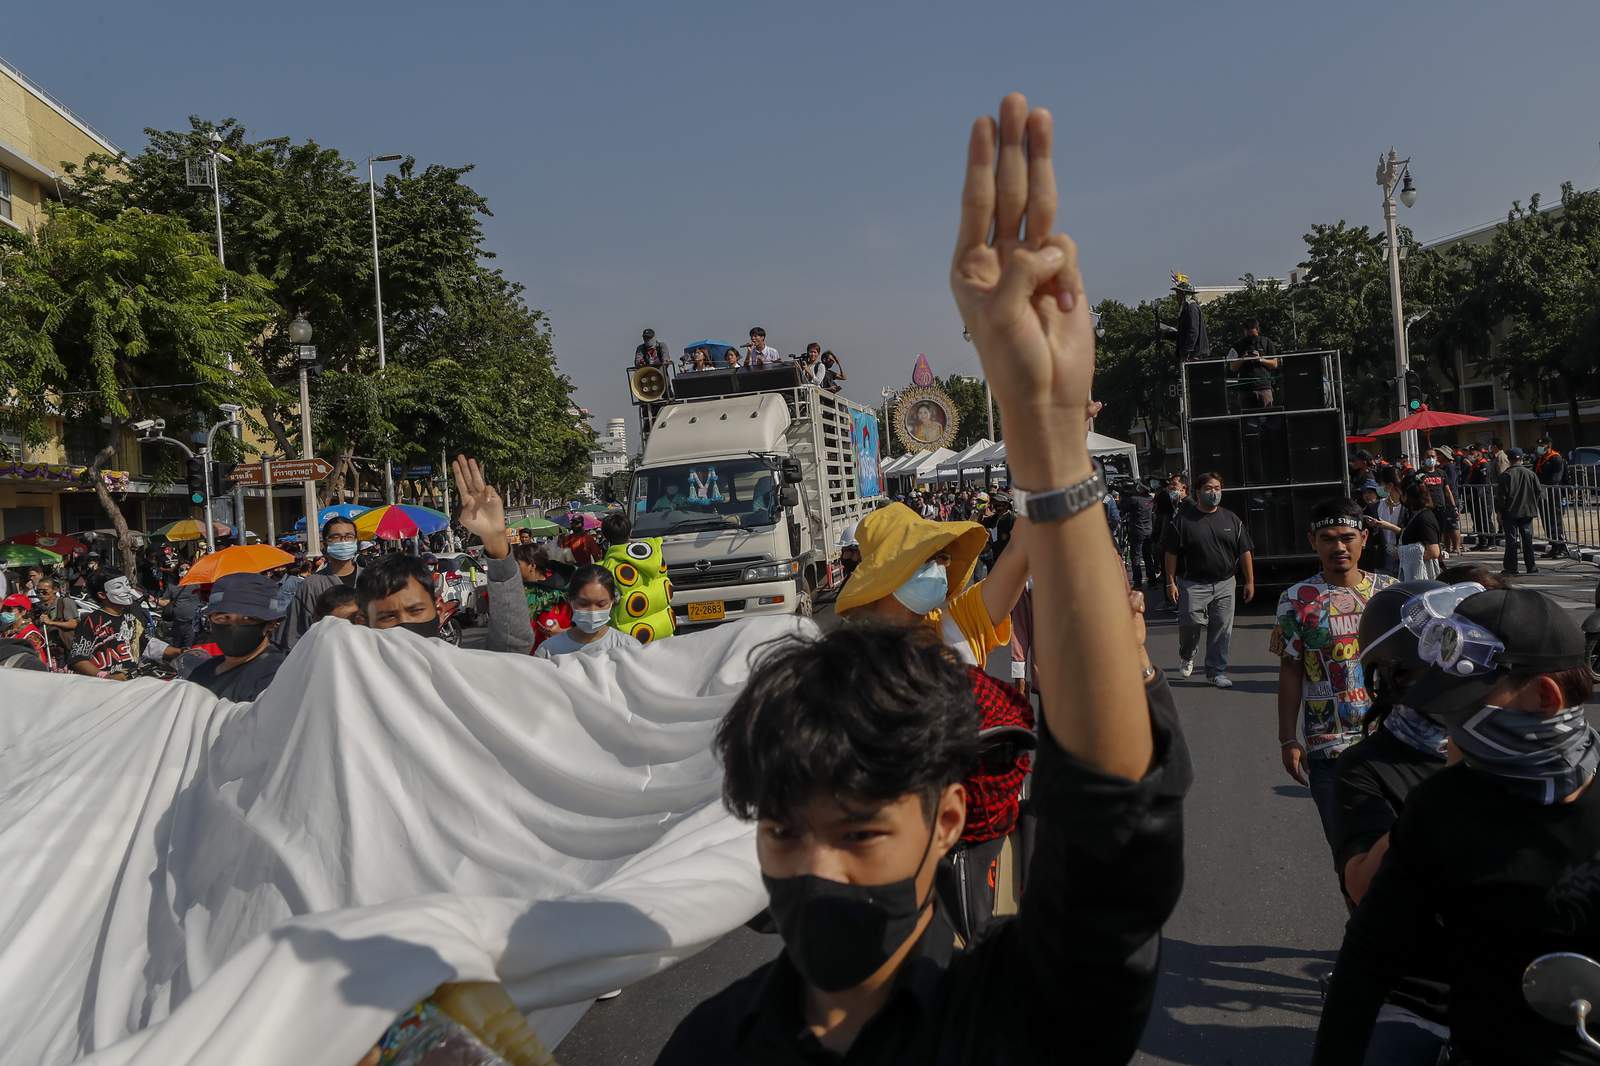 Thai protesters rally again, promote a diversity of causes